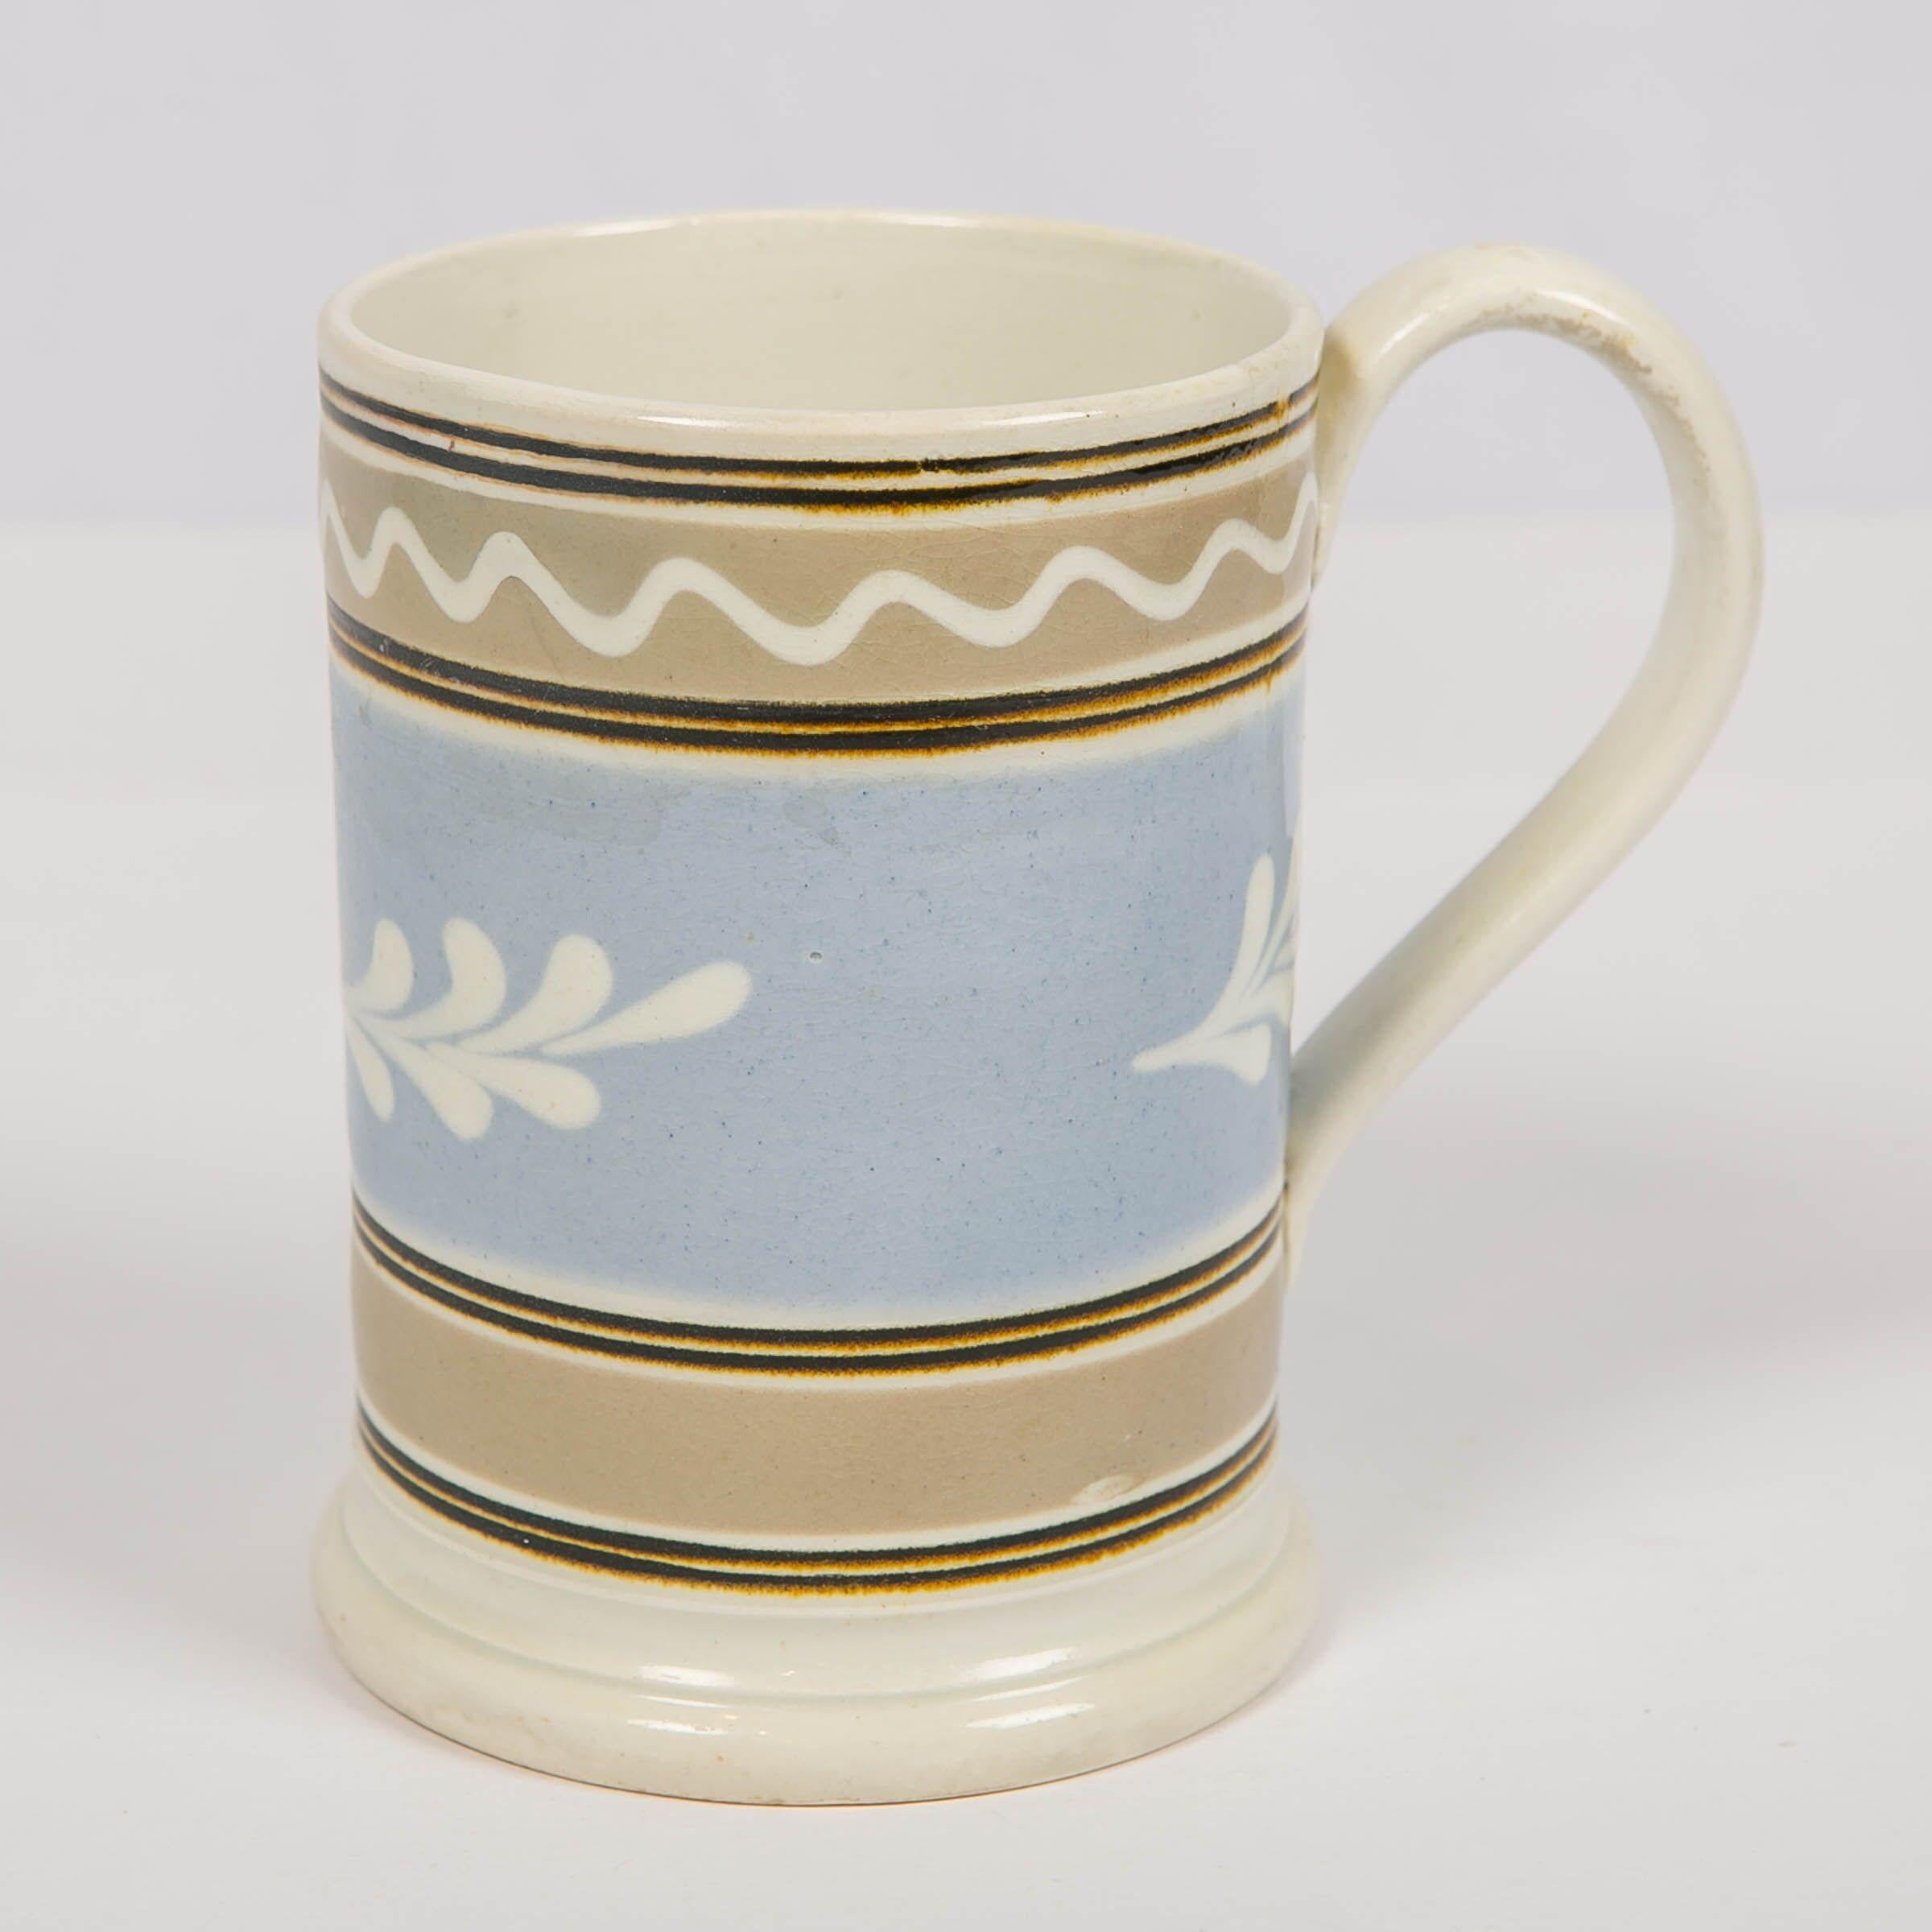 Rickard Collection Mochaware Mug w/ Oak Leaf & Wavy Line Decoration  In Good Condition For Sale In Katonah, NY